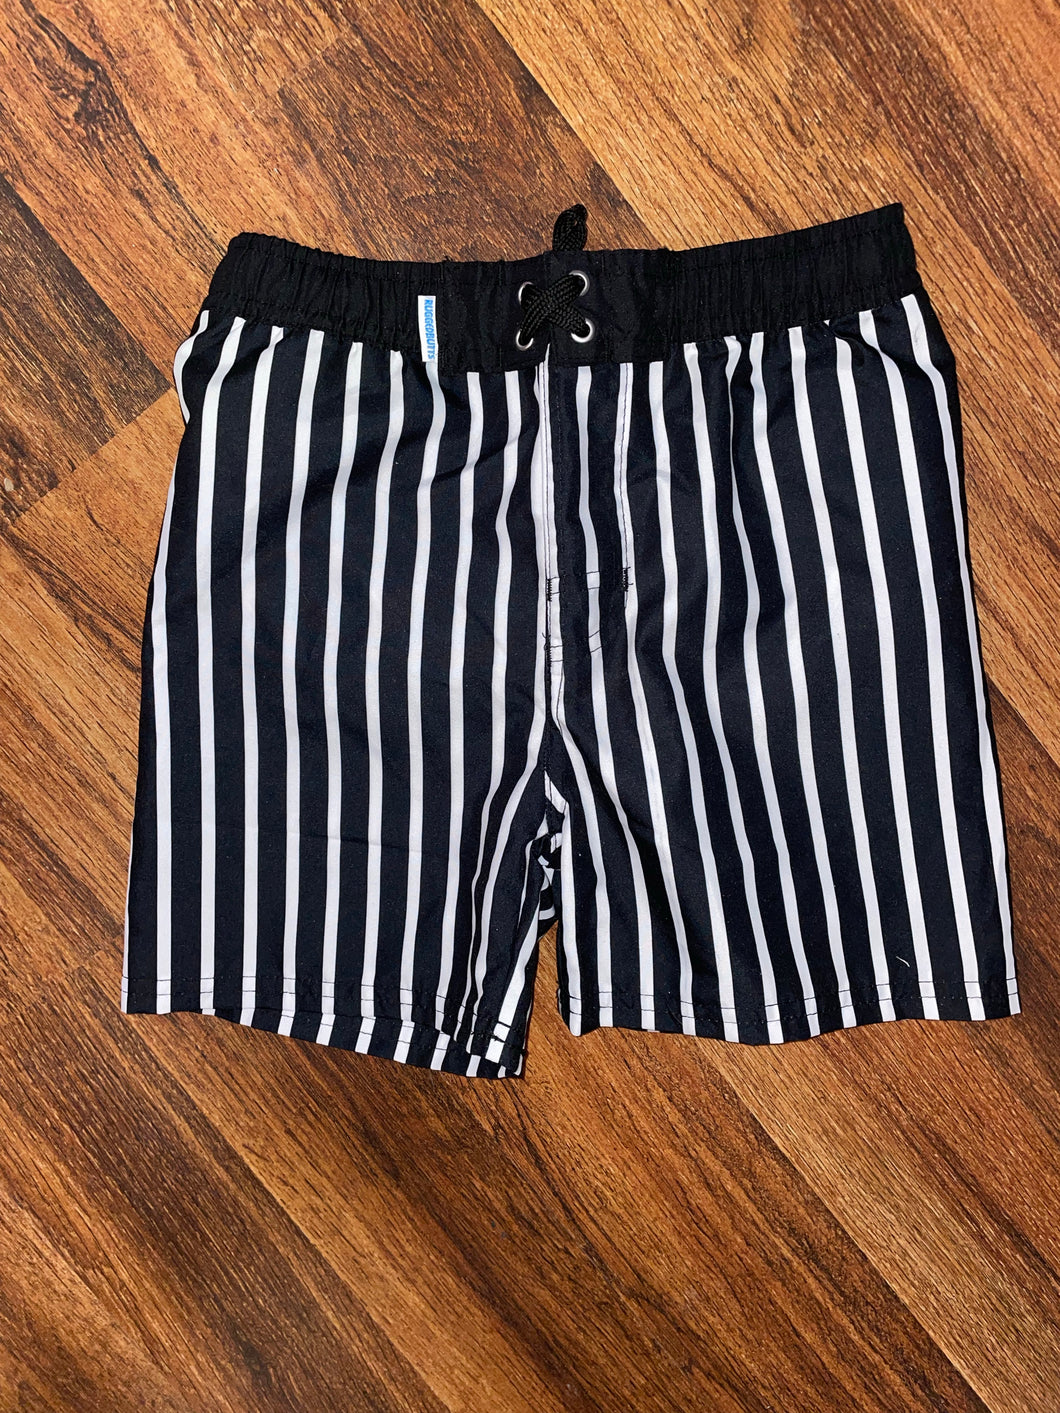 NWT Rugged Butts size 5 swim